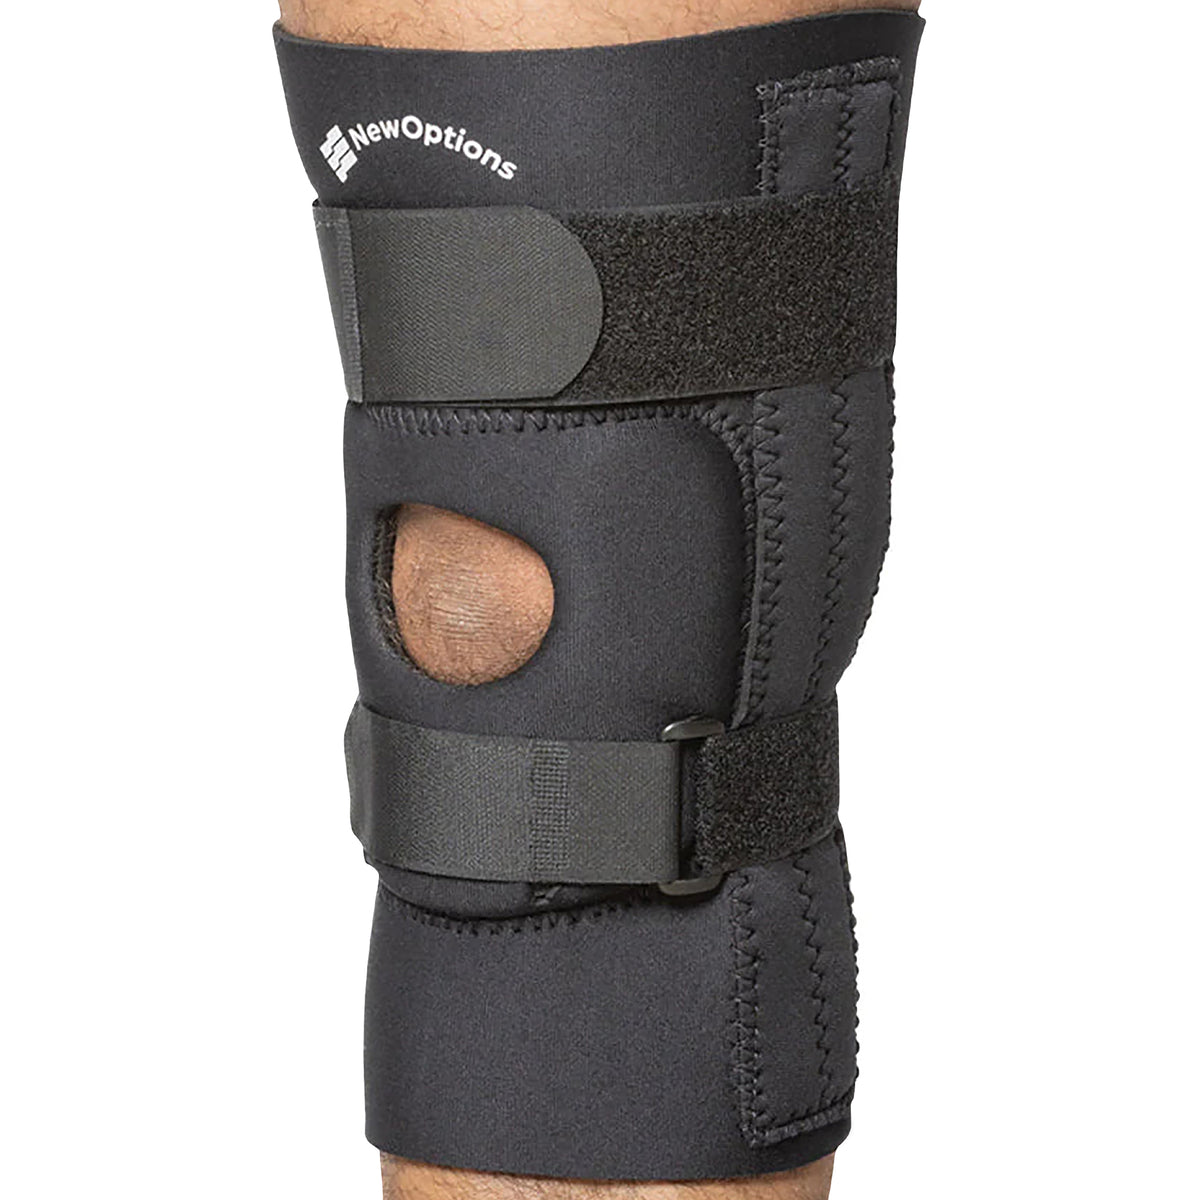 Knee Sleeve with Open Patella with Superior Tubular Buttress (K9